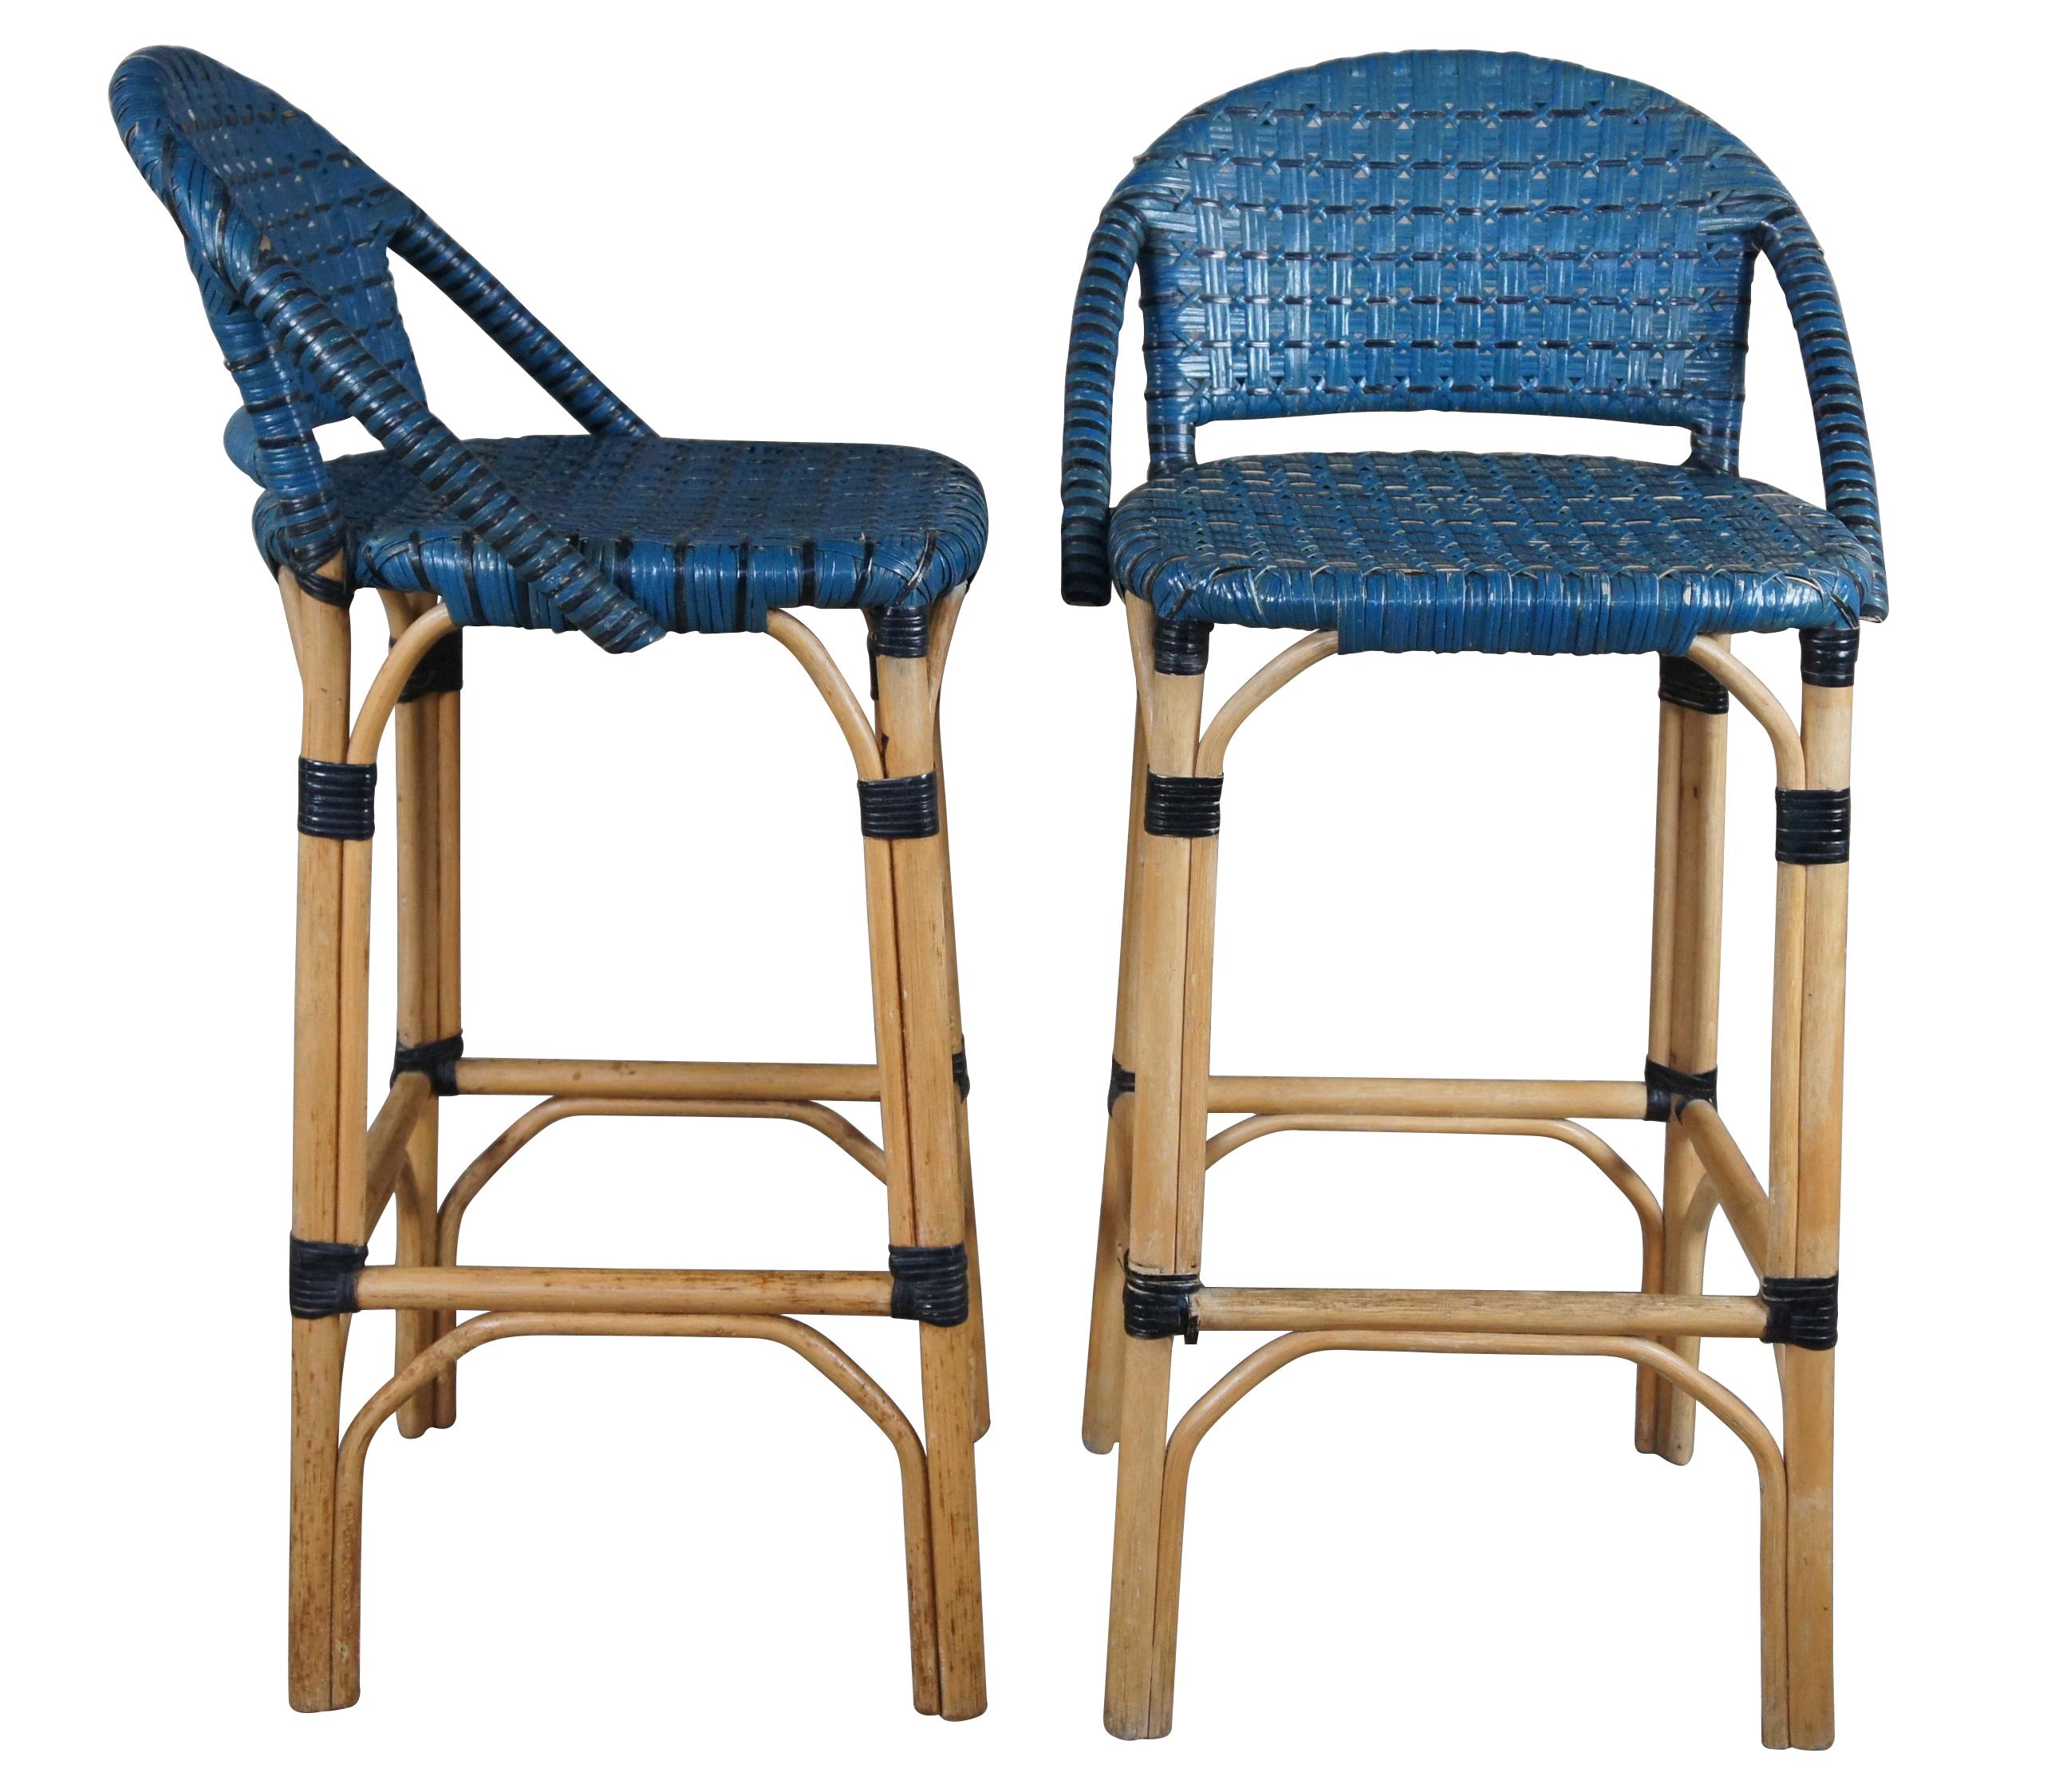 3 vintage Bohemian counter height stools after Maison Gatti, circa 1970s. Made from Bamboo and blue woven rattan. Feature a sleek bentwood design with black accents

Dimensions

Measures : 20